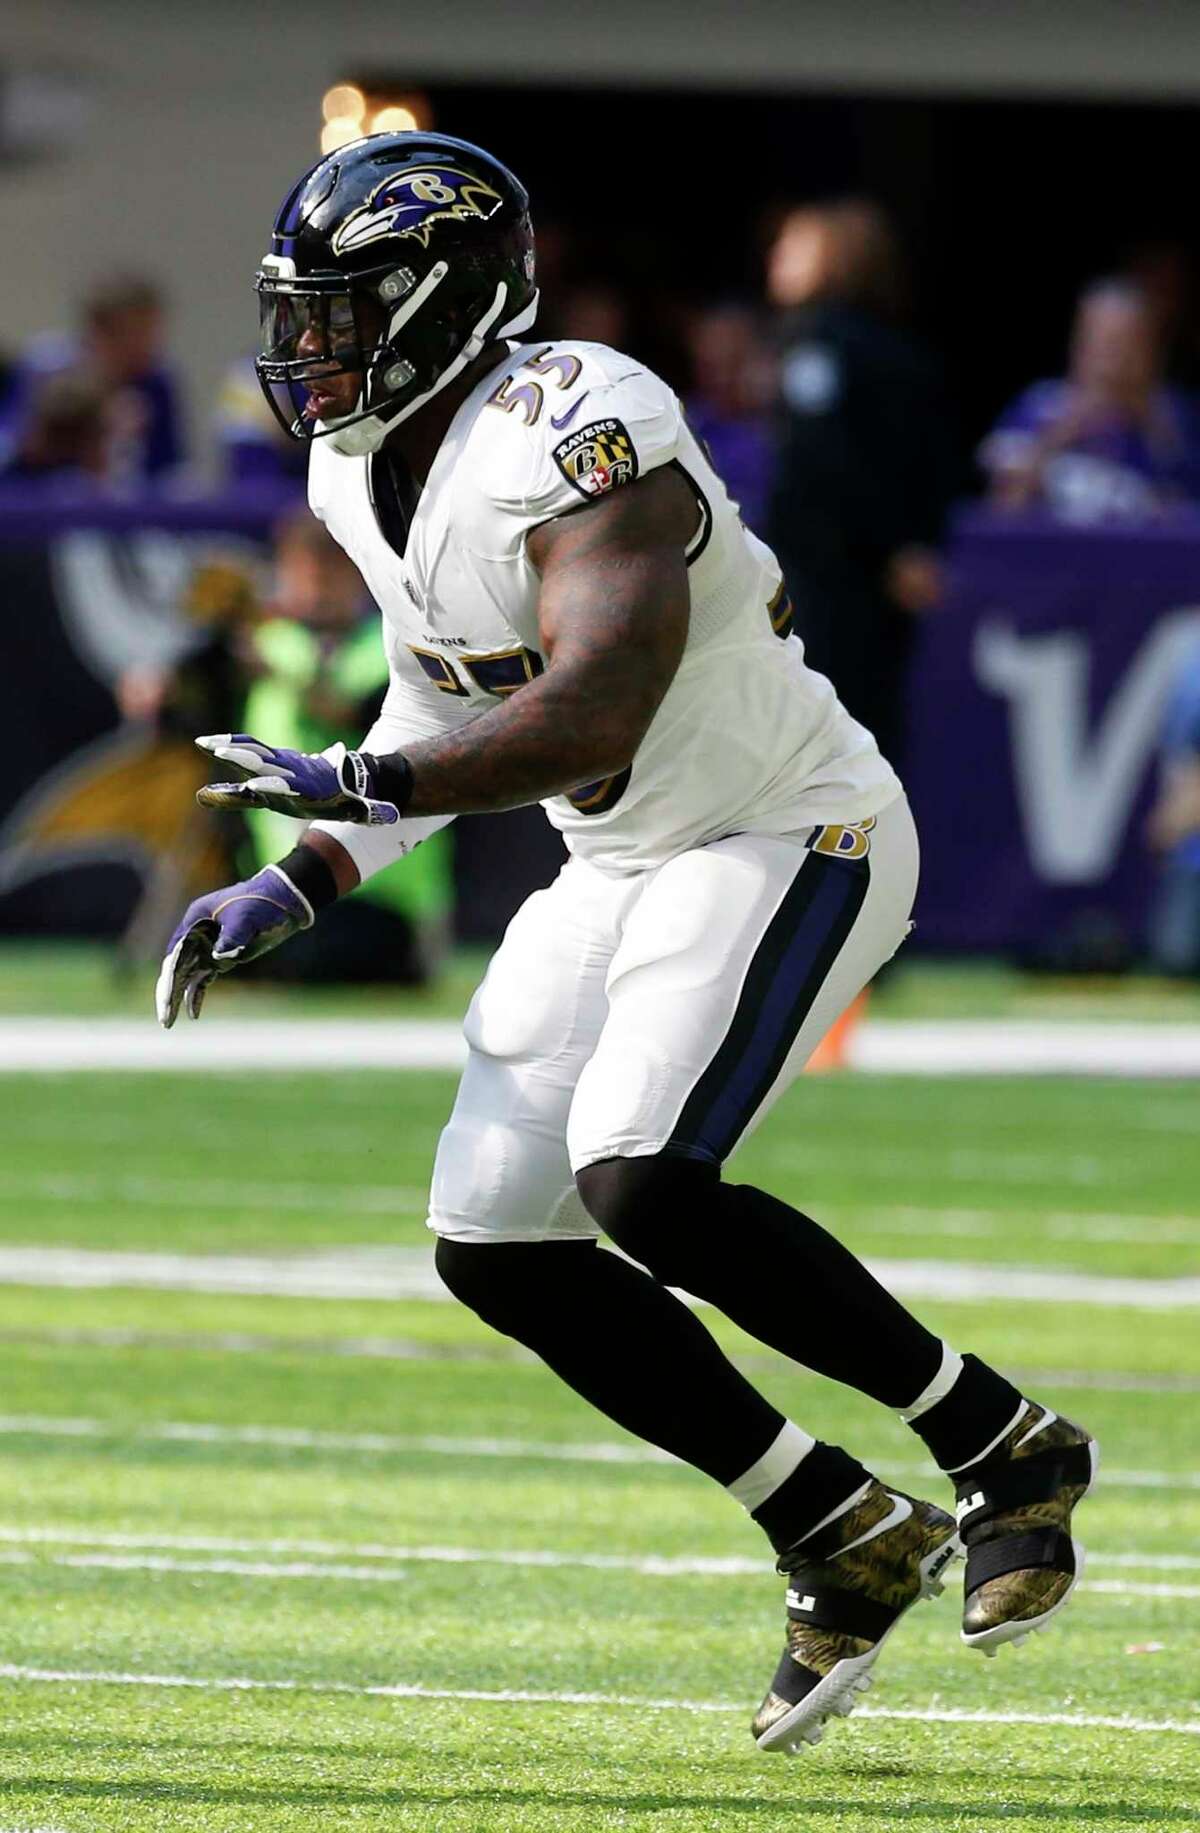 Ravens linebacker Terrell Suggs plans to sign with Cardinals, NFL